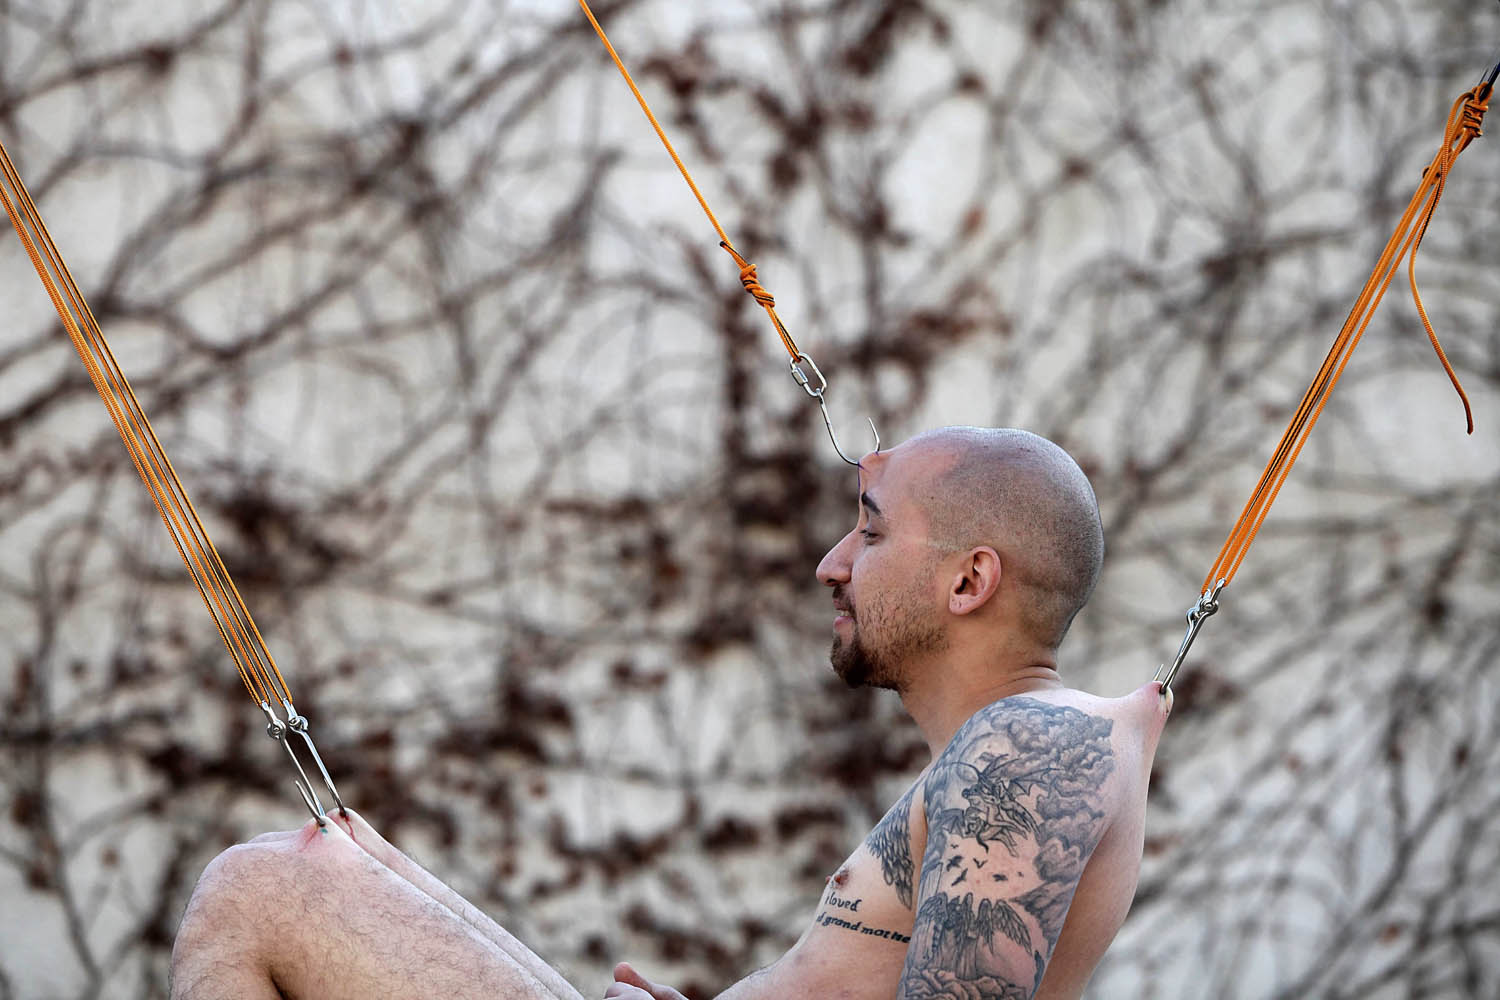 Feb. 8, 2014. An Israeli hanging on hooks preforms the Suspension (body modification) during the annual Israel Tattoo Convention in Tel Aviv, Israel.